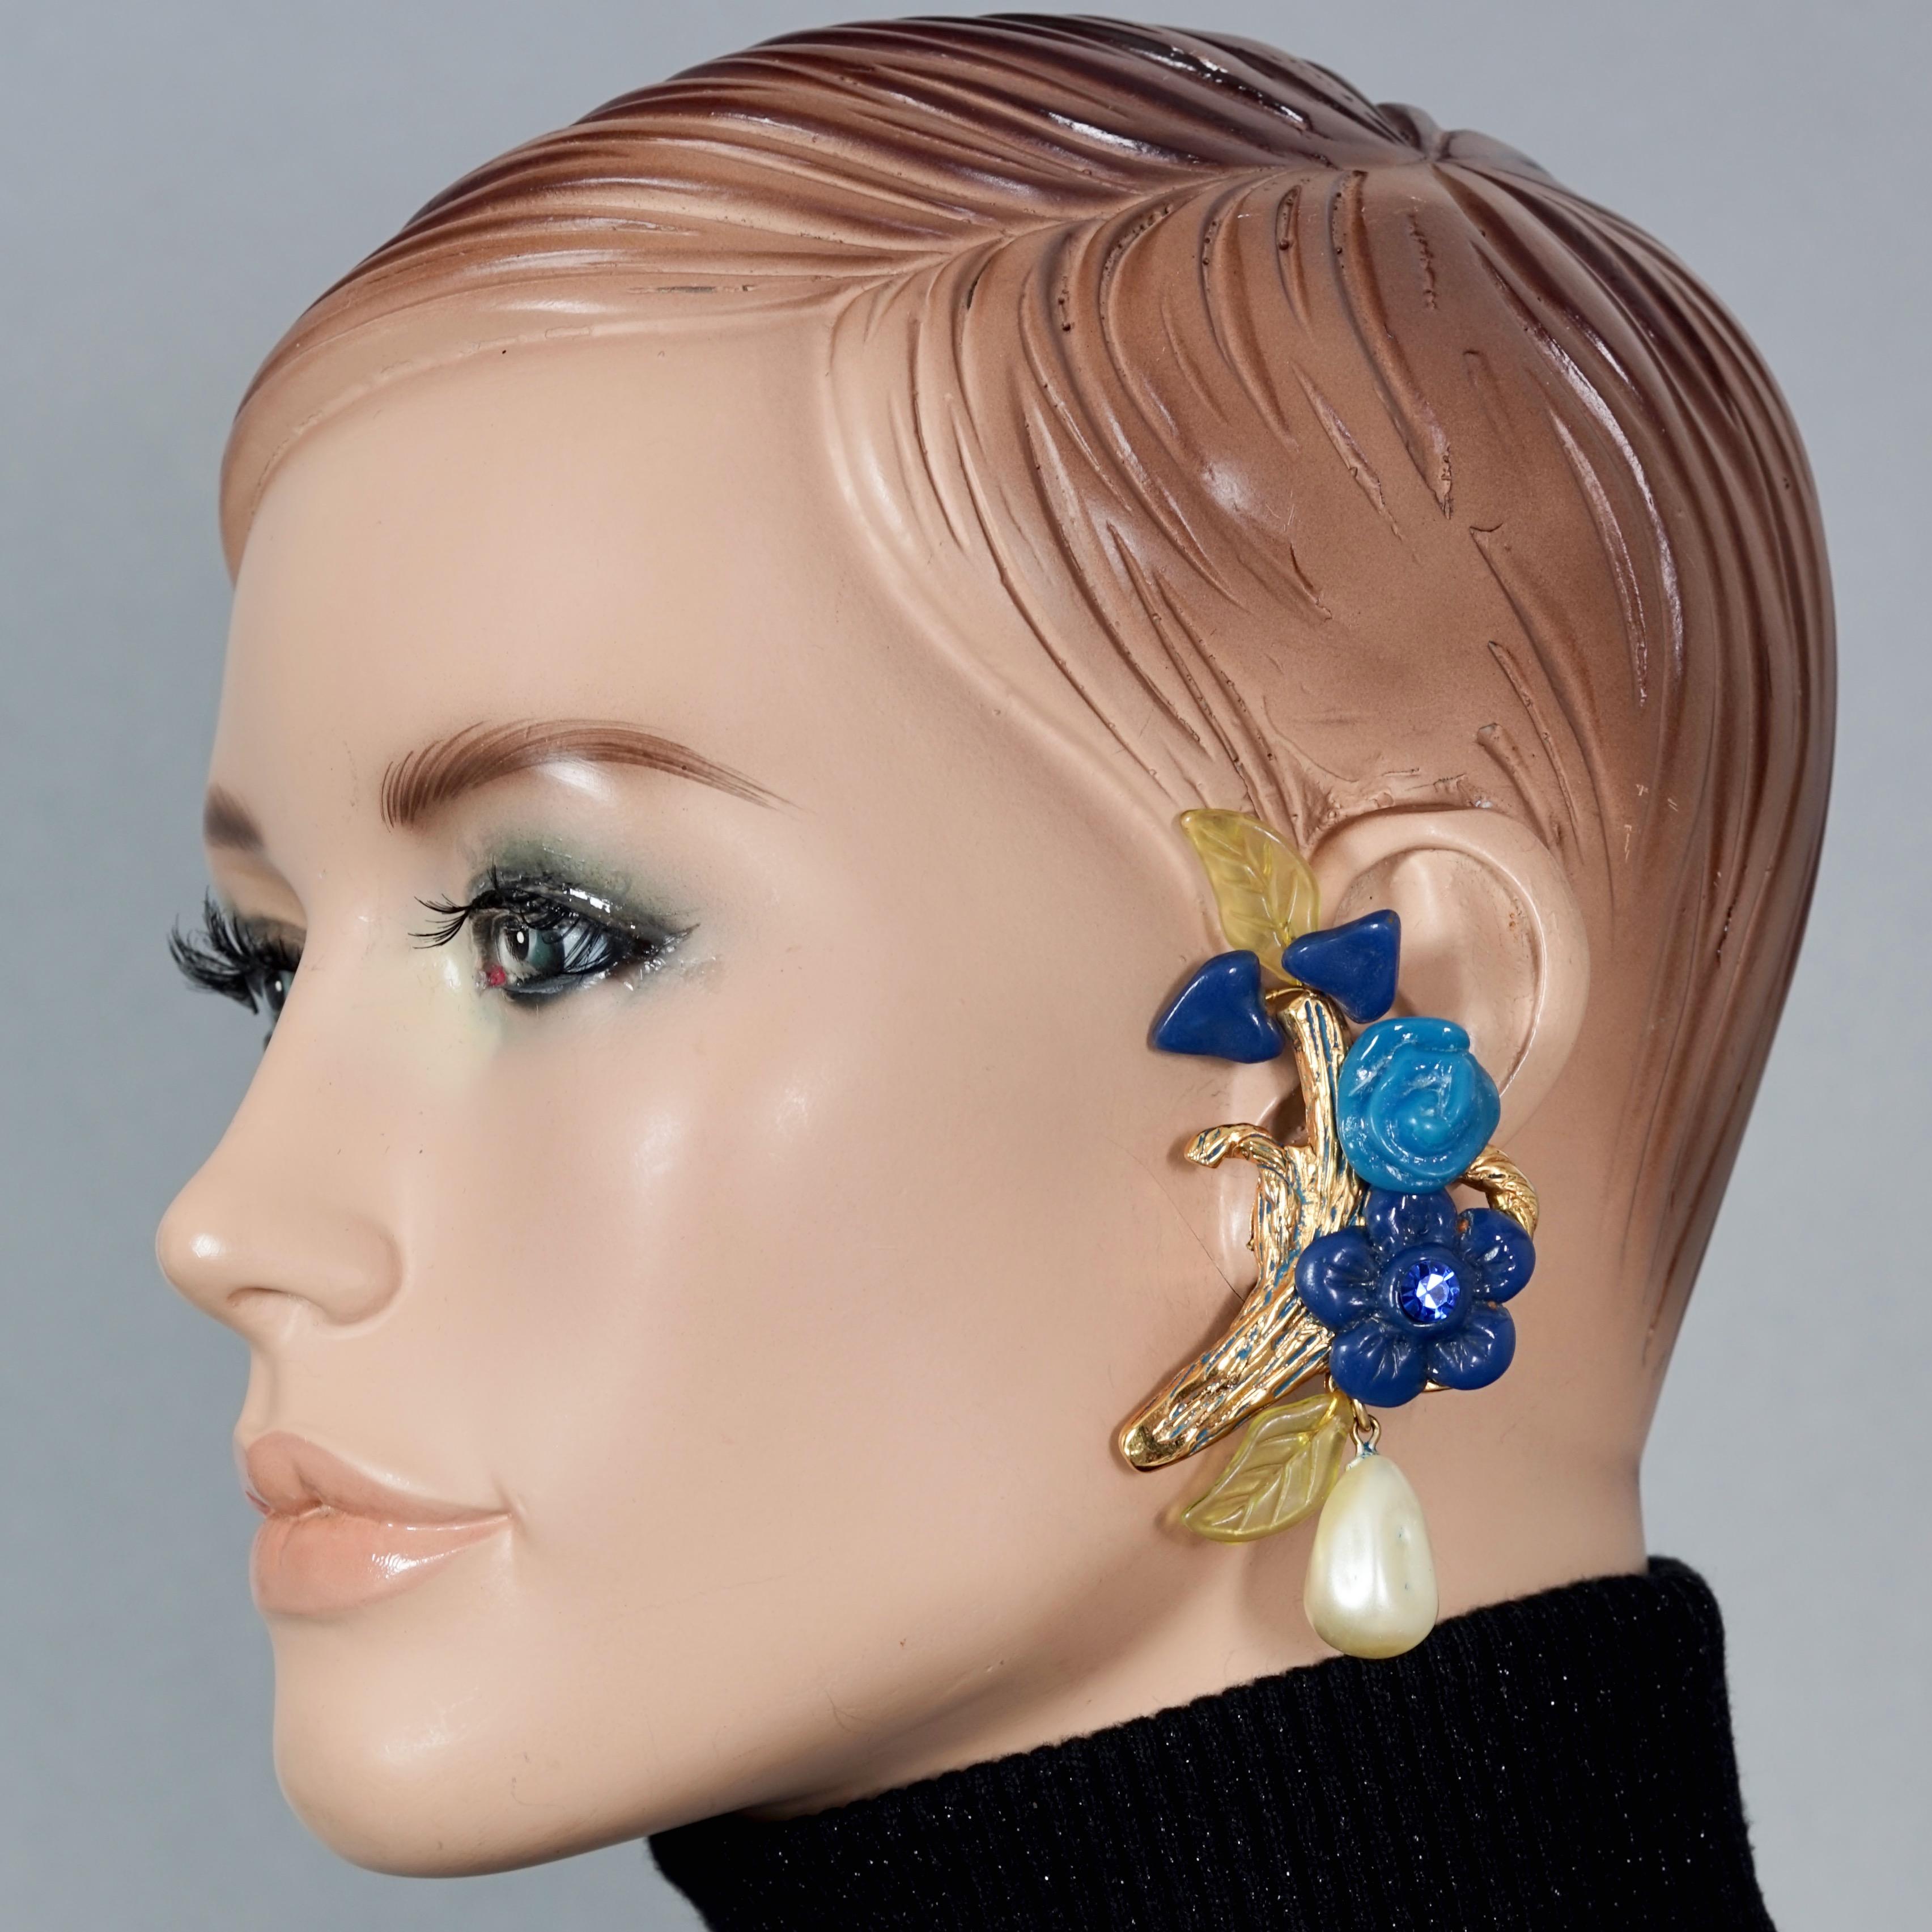 Vintage Massive KALINGER PARIS Branch Flower Leaves Pearl Dangling Earrings

Measurements:
Height: 3.81 inches (9.7 cm)
Width: 2 inches (5.1 cm)
Weight per Earring: 26 grams

Features:
- 100% Authentic KALINGER PARIS.
- Massive branch earrings with